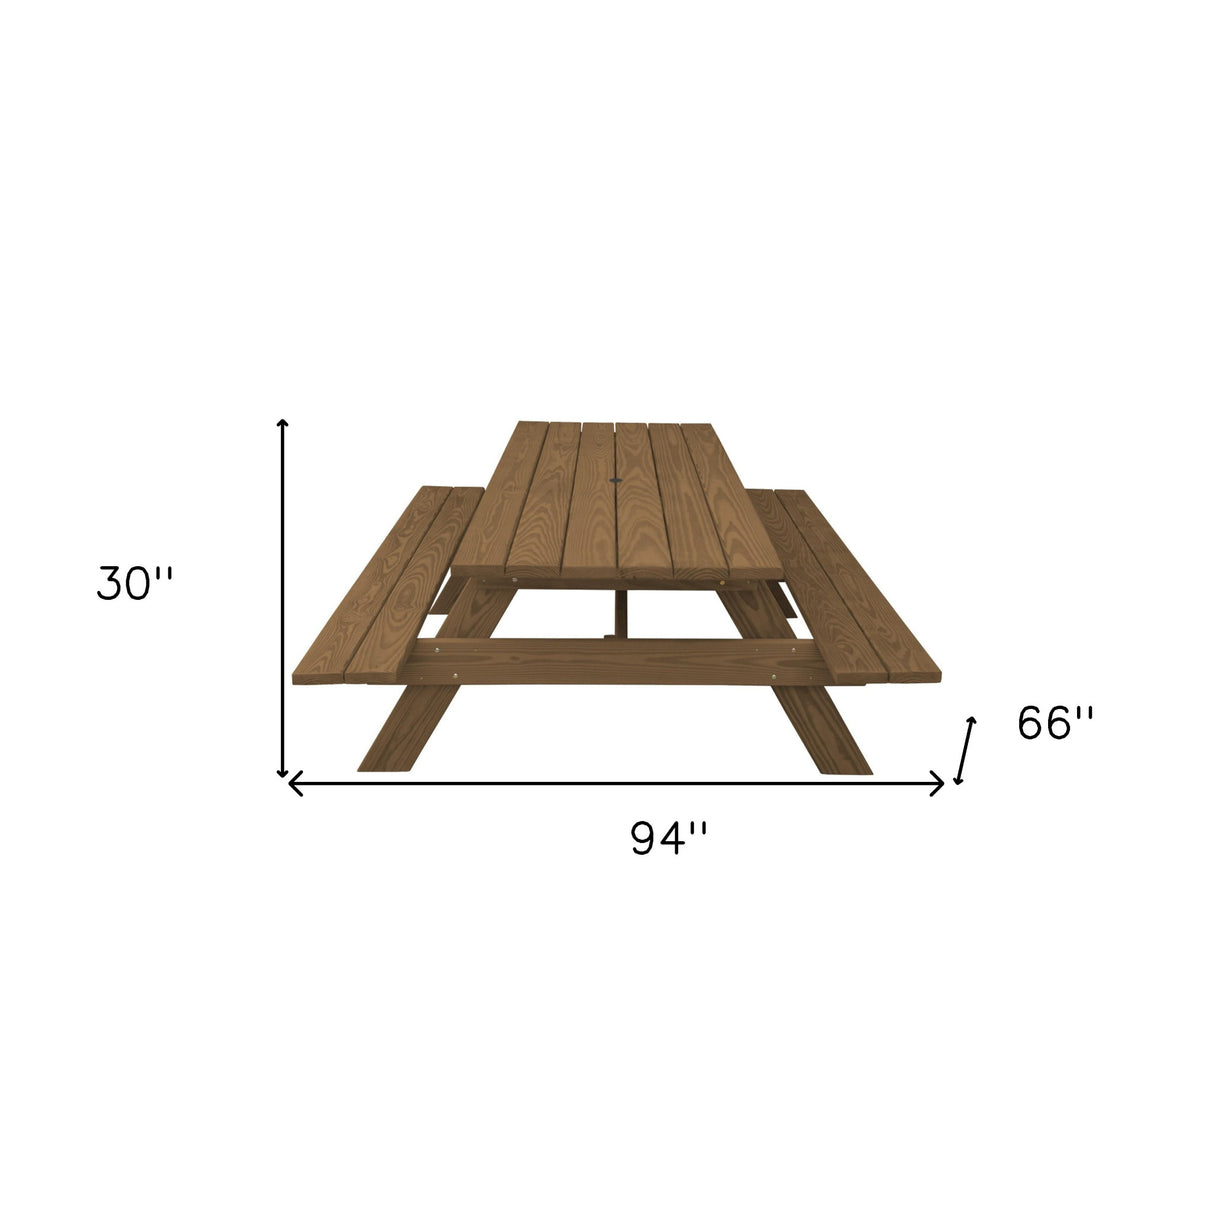 94" Wood Brown Solid Wood Outdoor Picnic Table with Umbrella Hole